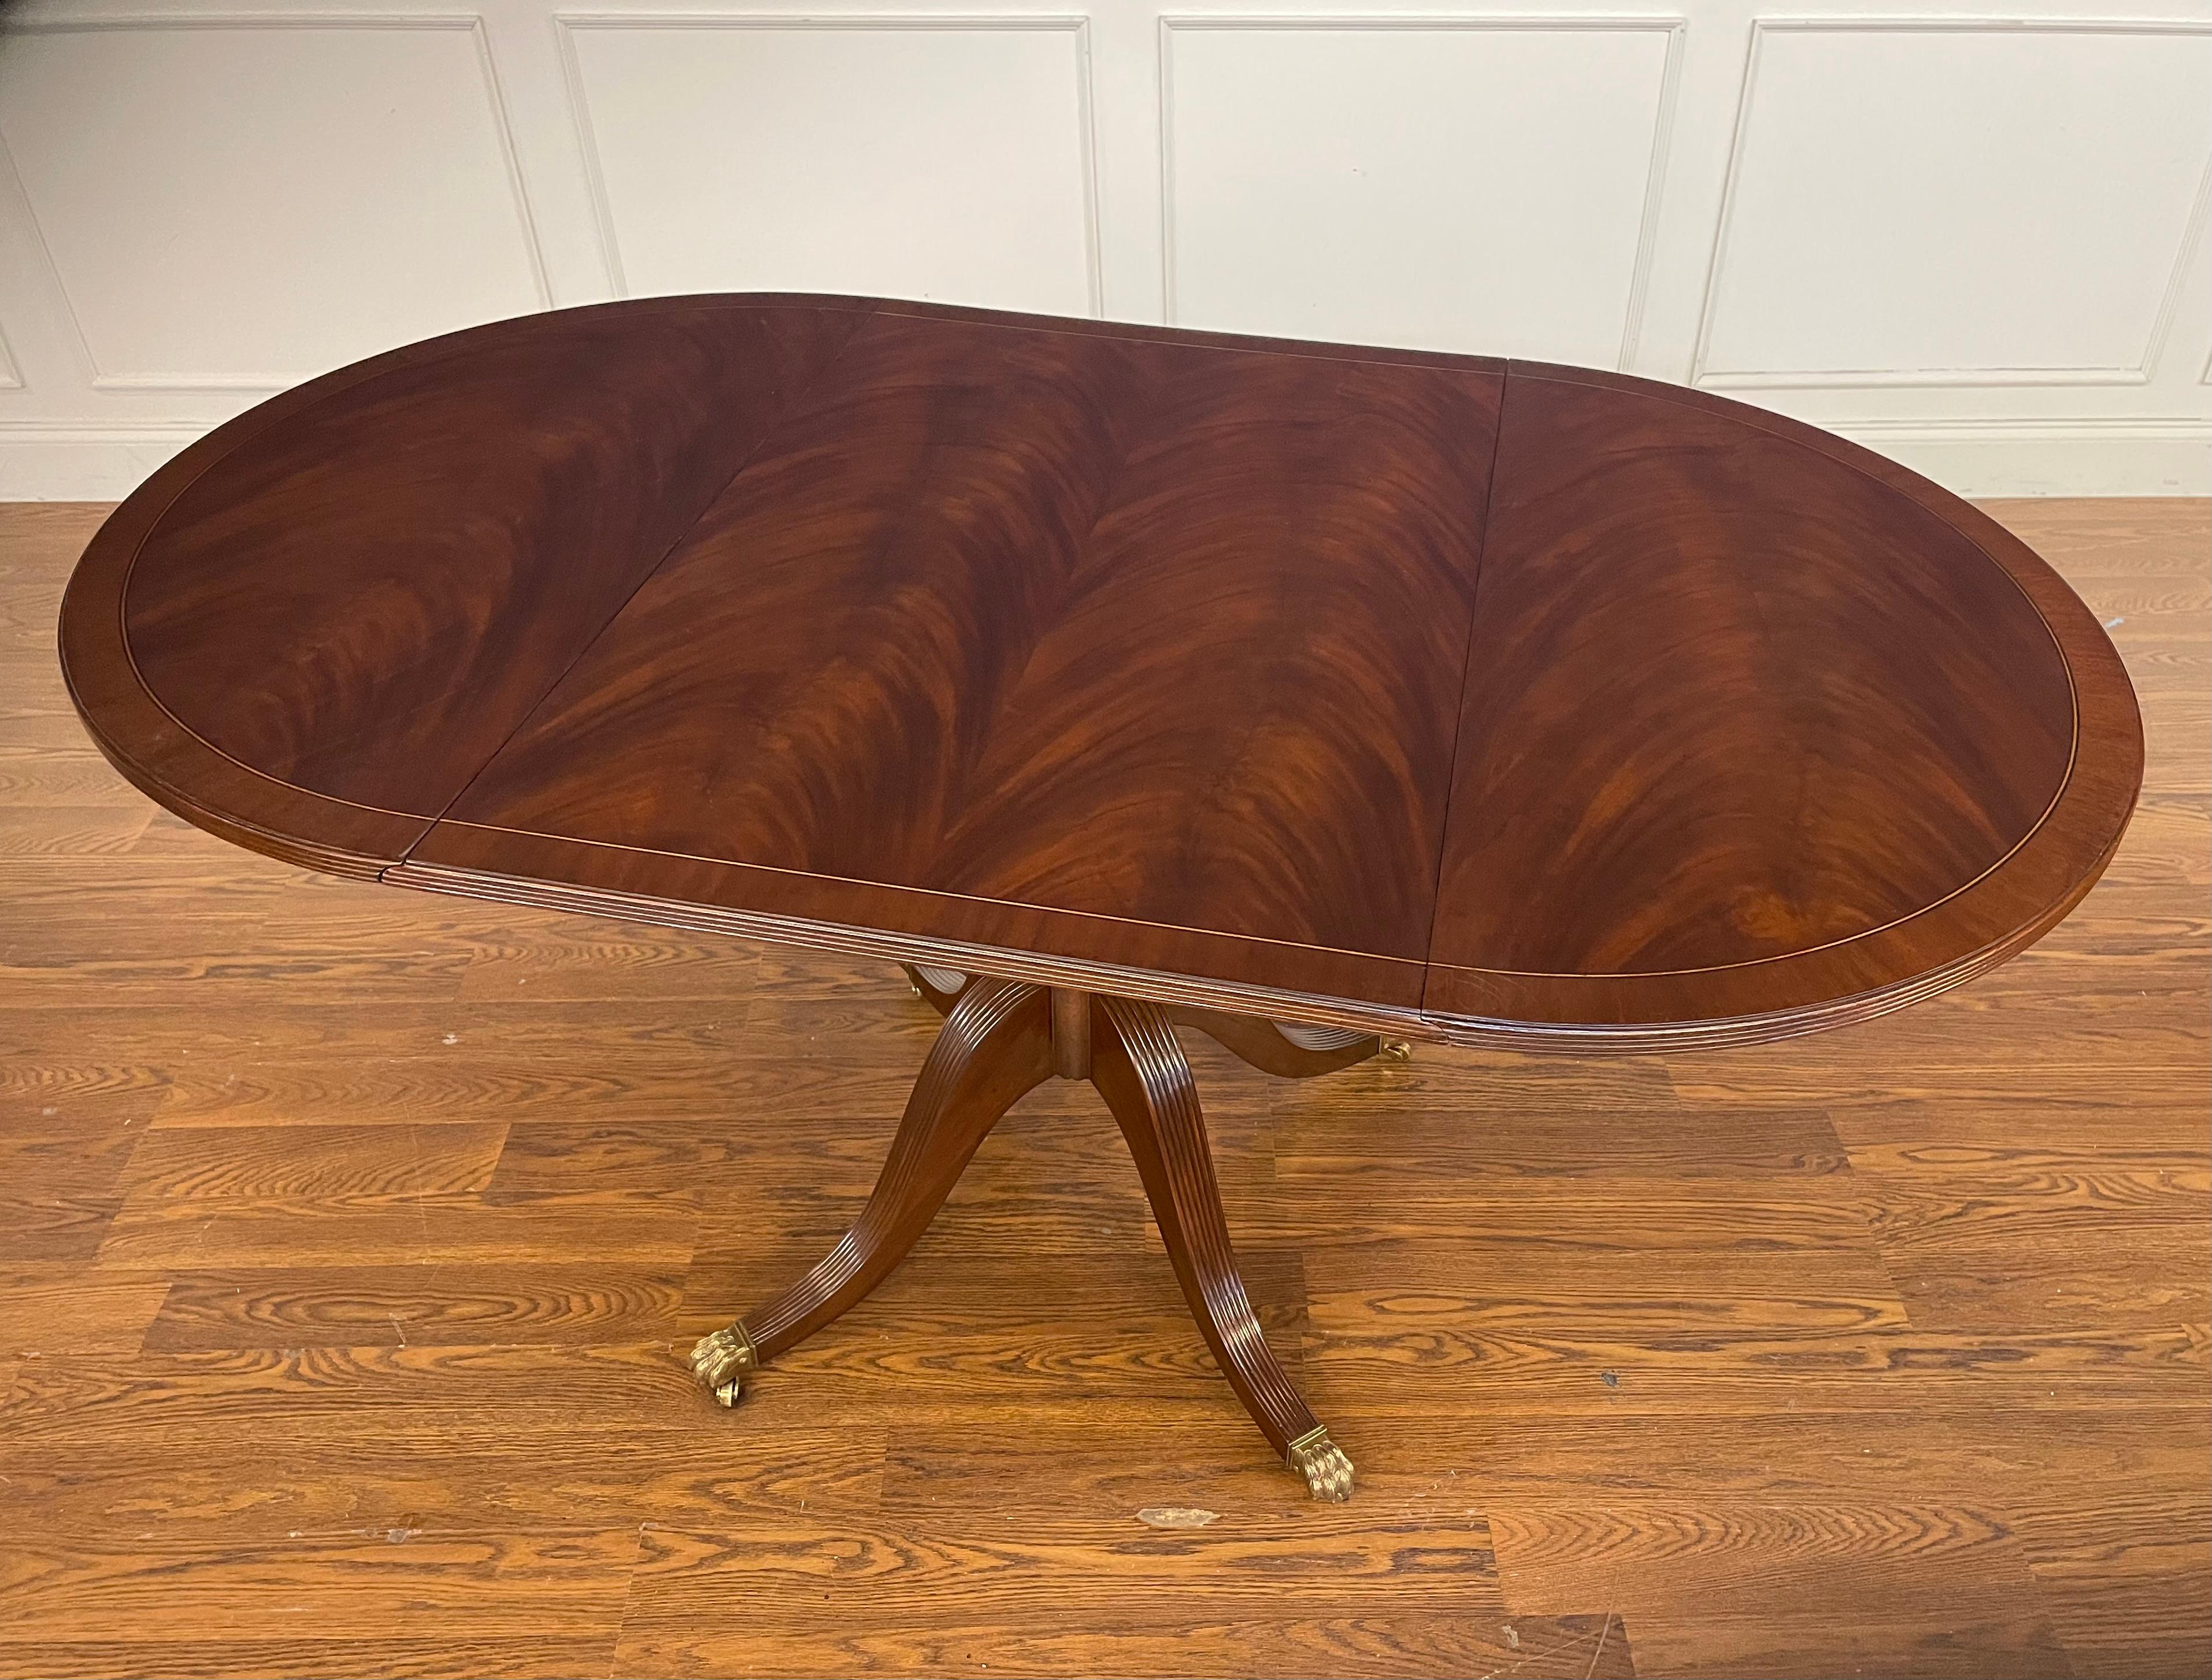 Contemporary Leighton Hall Mahogany Dining/Breakfast Table - Showroom Sample For Sale